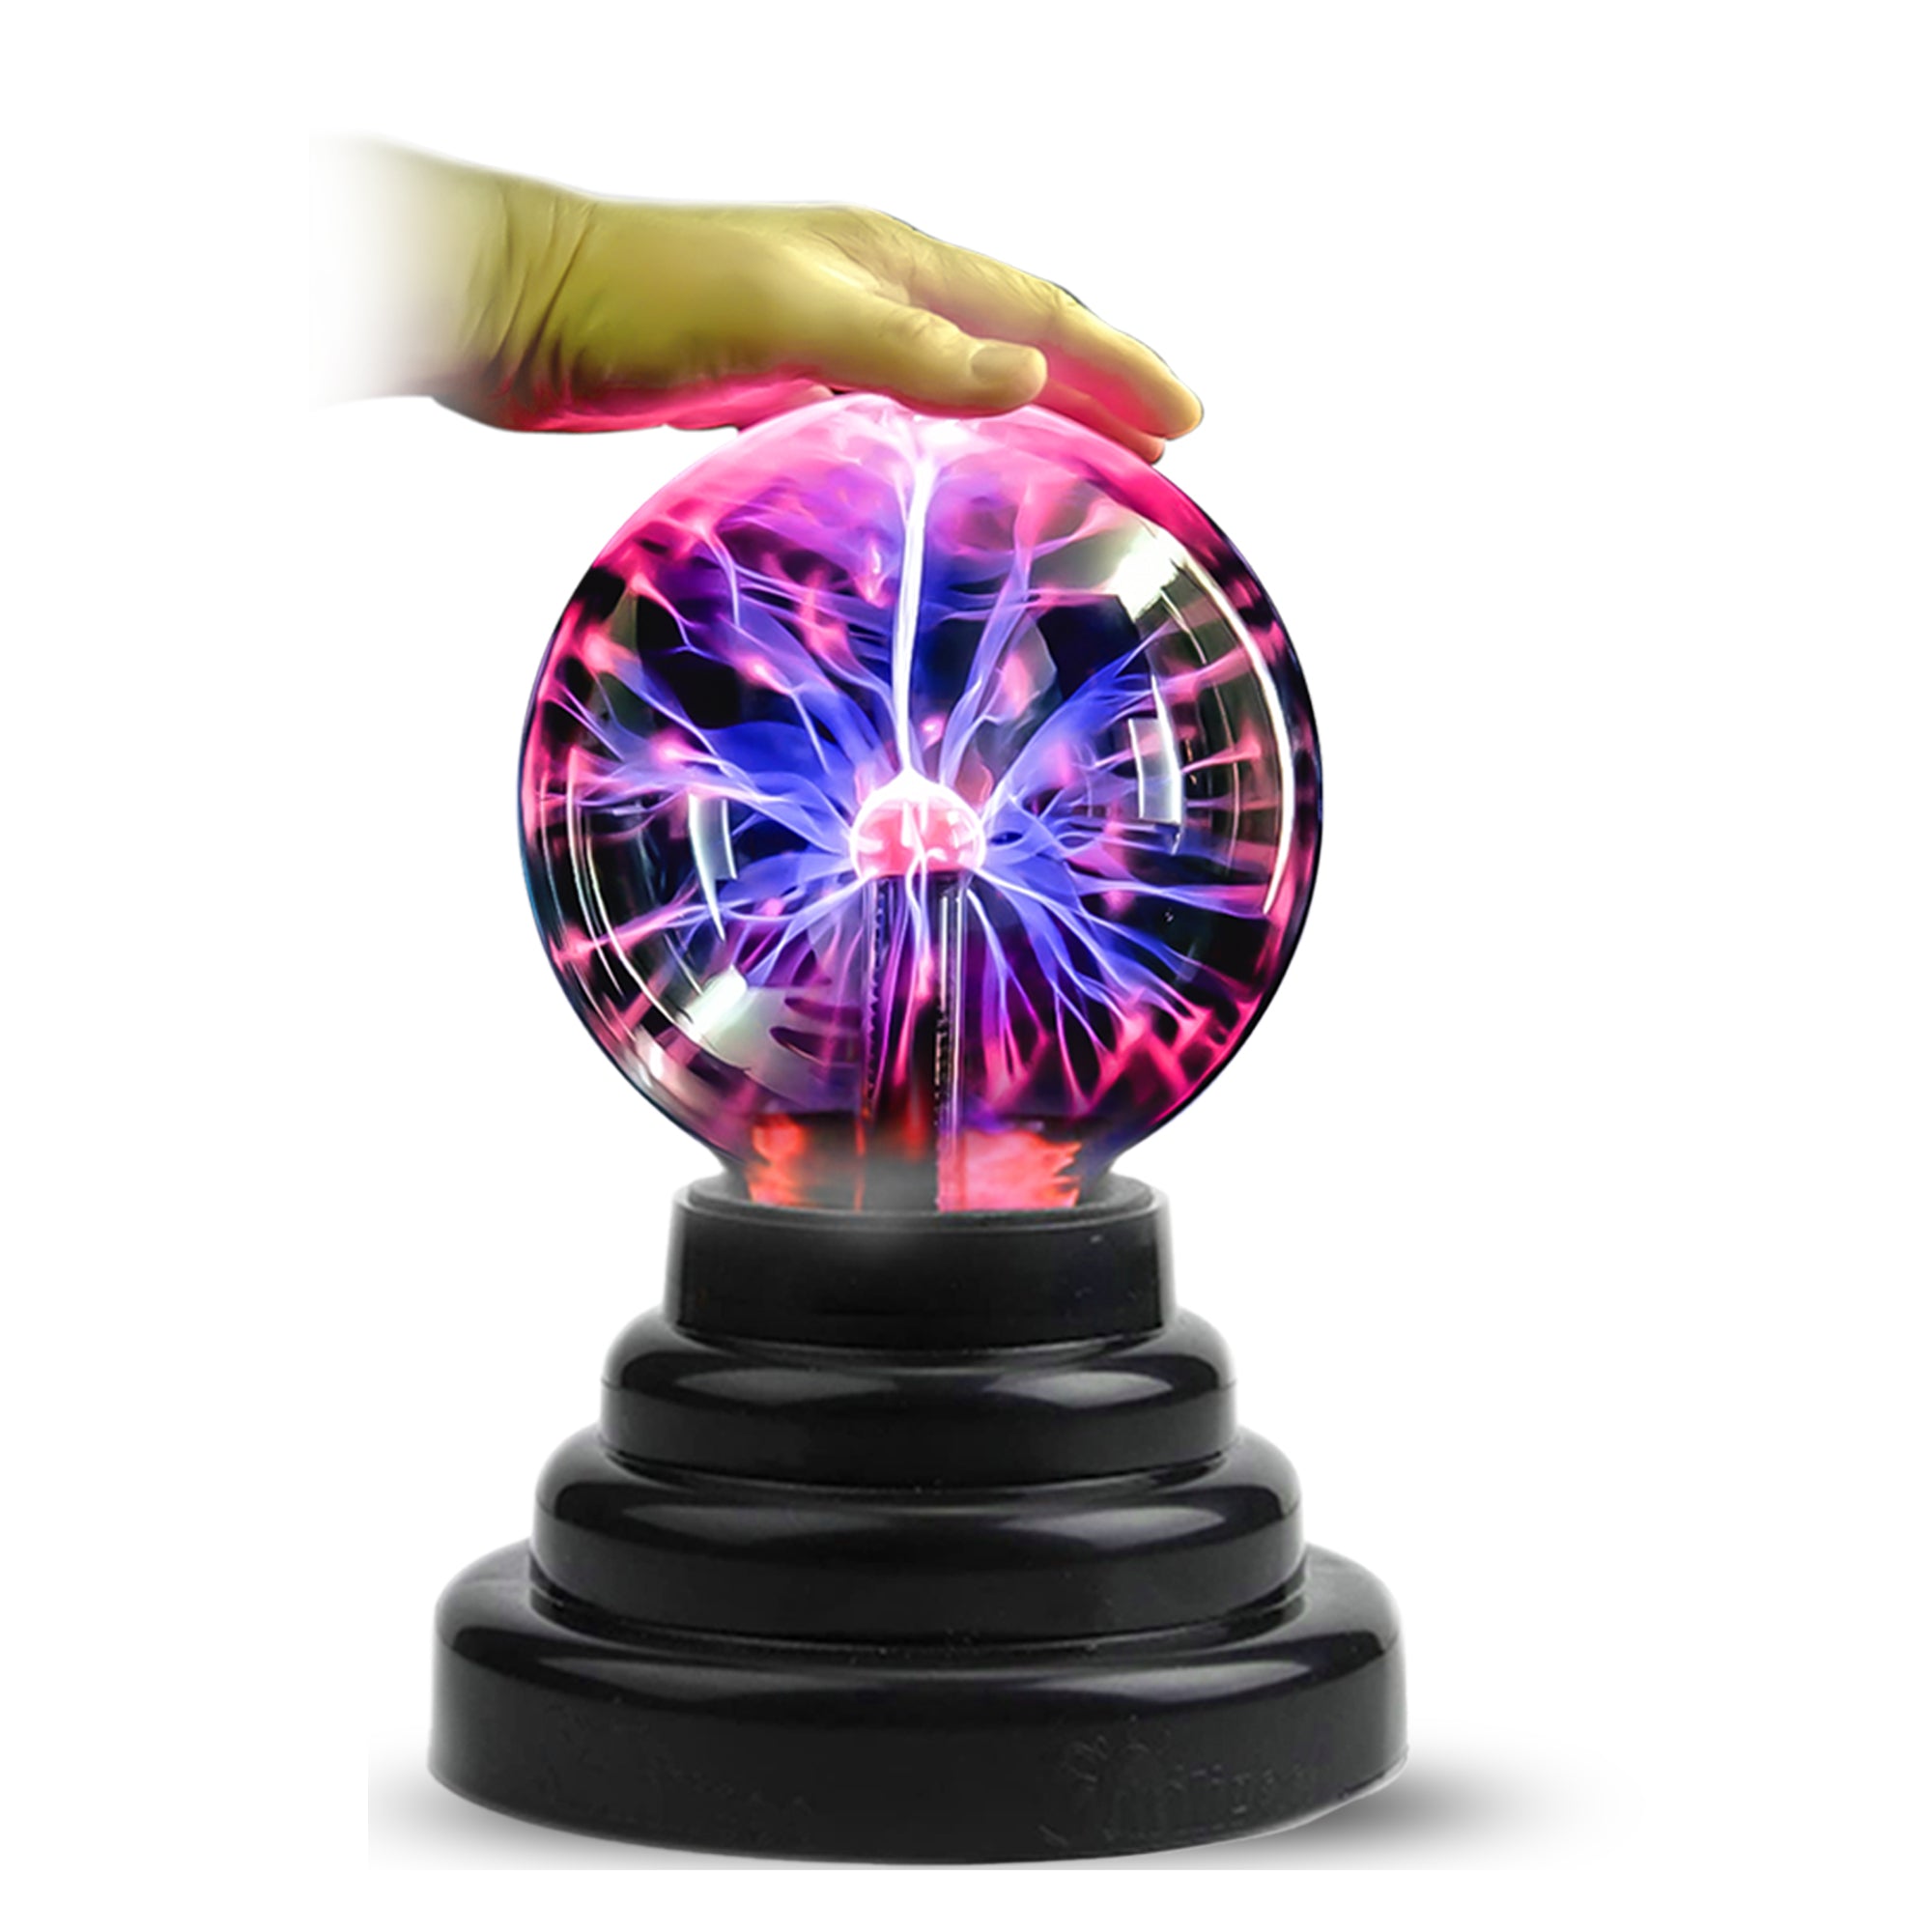 Brewish 3 inch Plasma Ball Lamp Touch Sensitive Novelty Nebula Sphere Globe  Magical Orb Toy Gift for Kids, Men & Women for Birthday, Christmas, Party